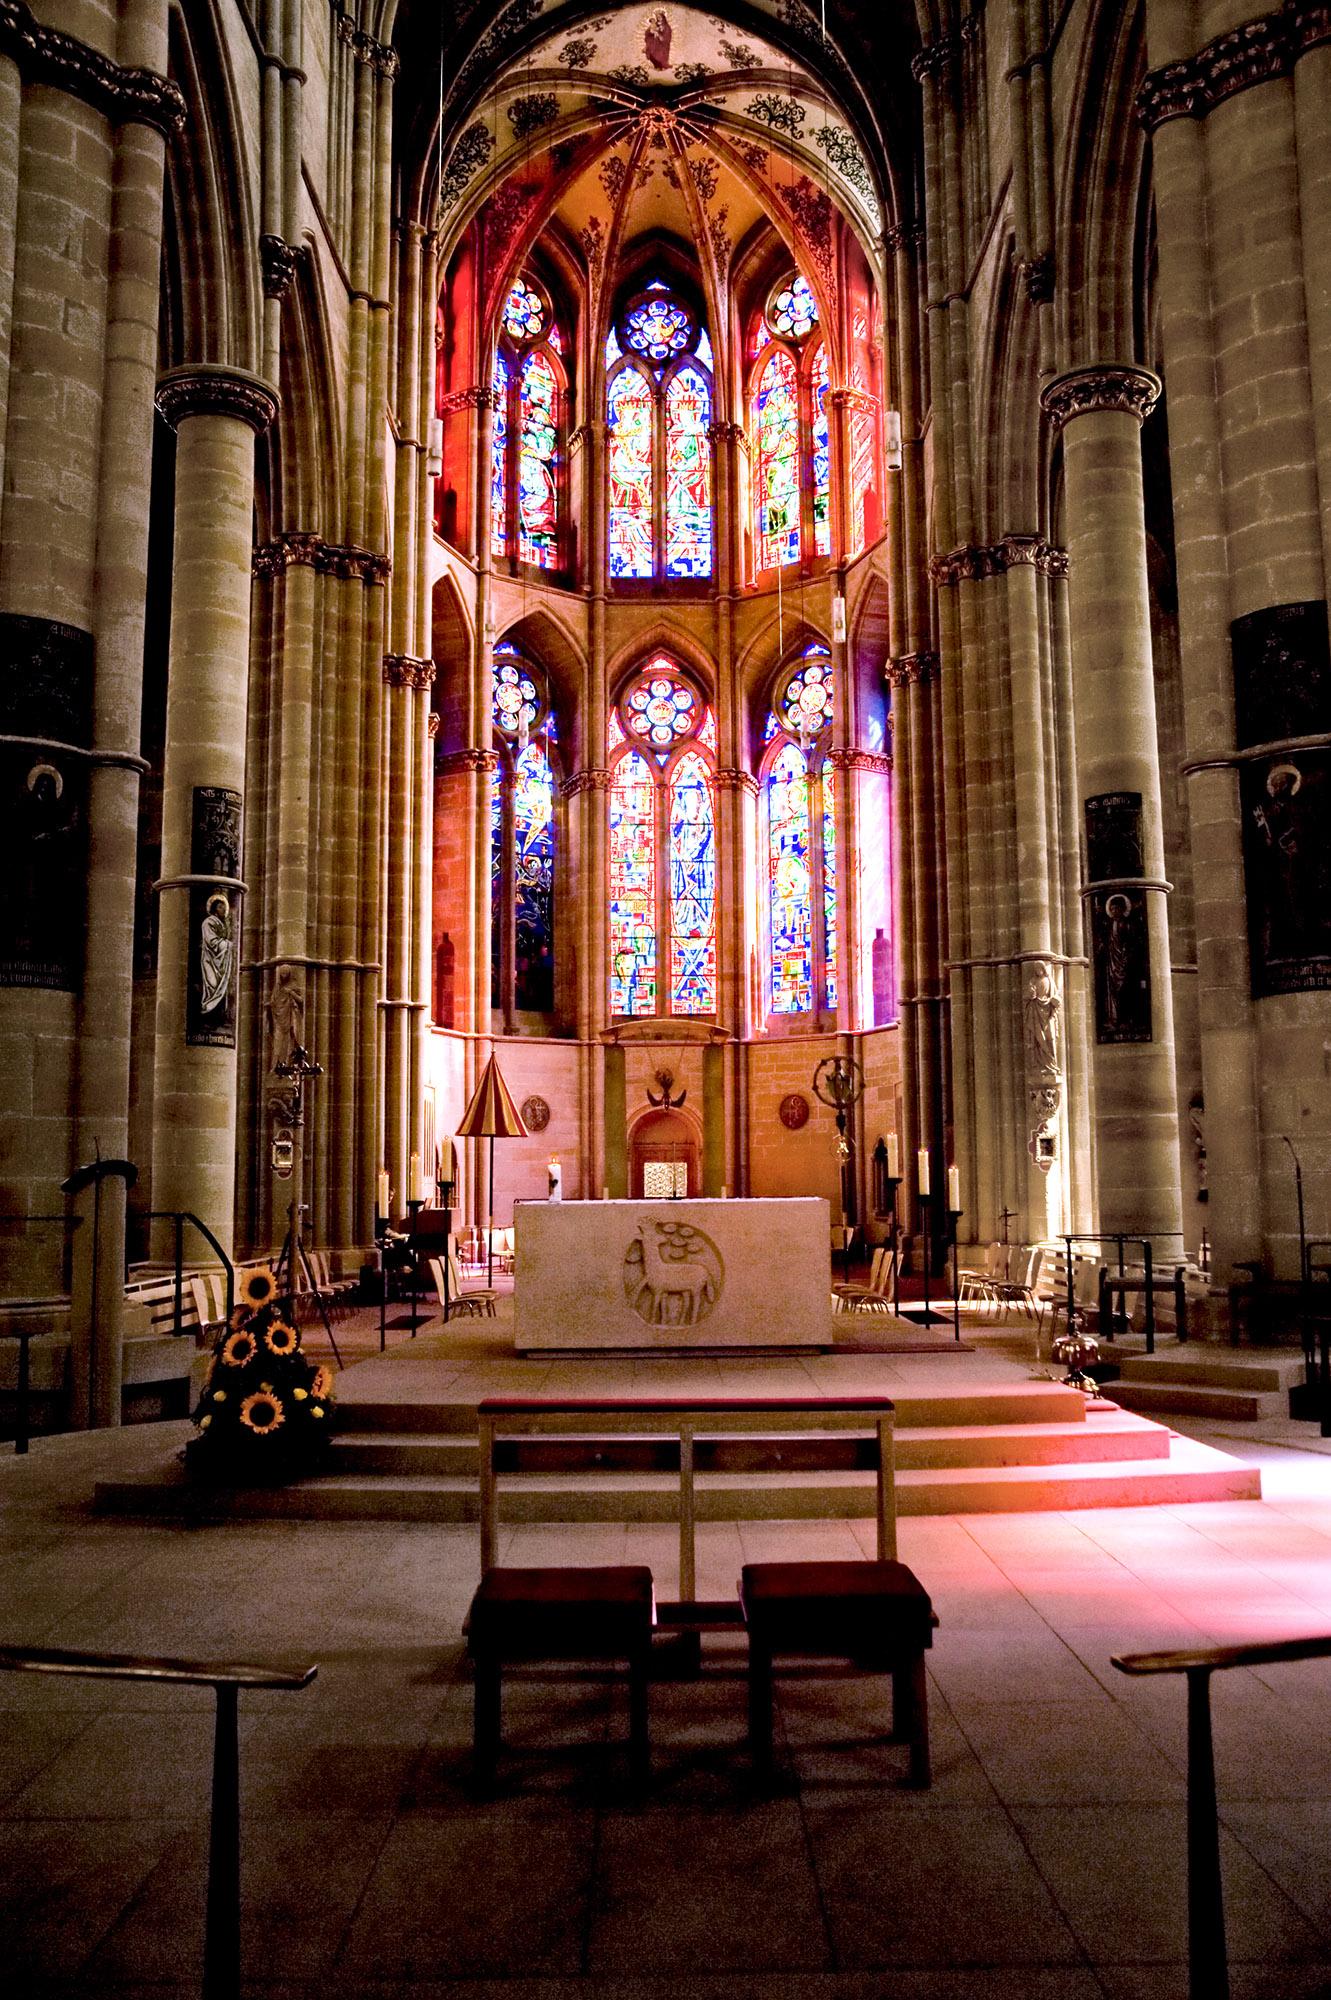 The splendid altar and stained glass of the Church of Our Lady